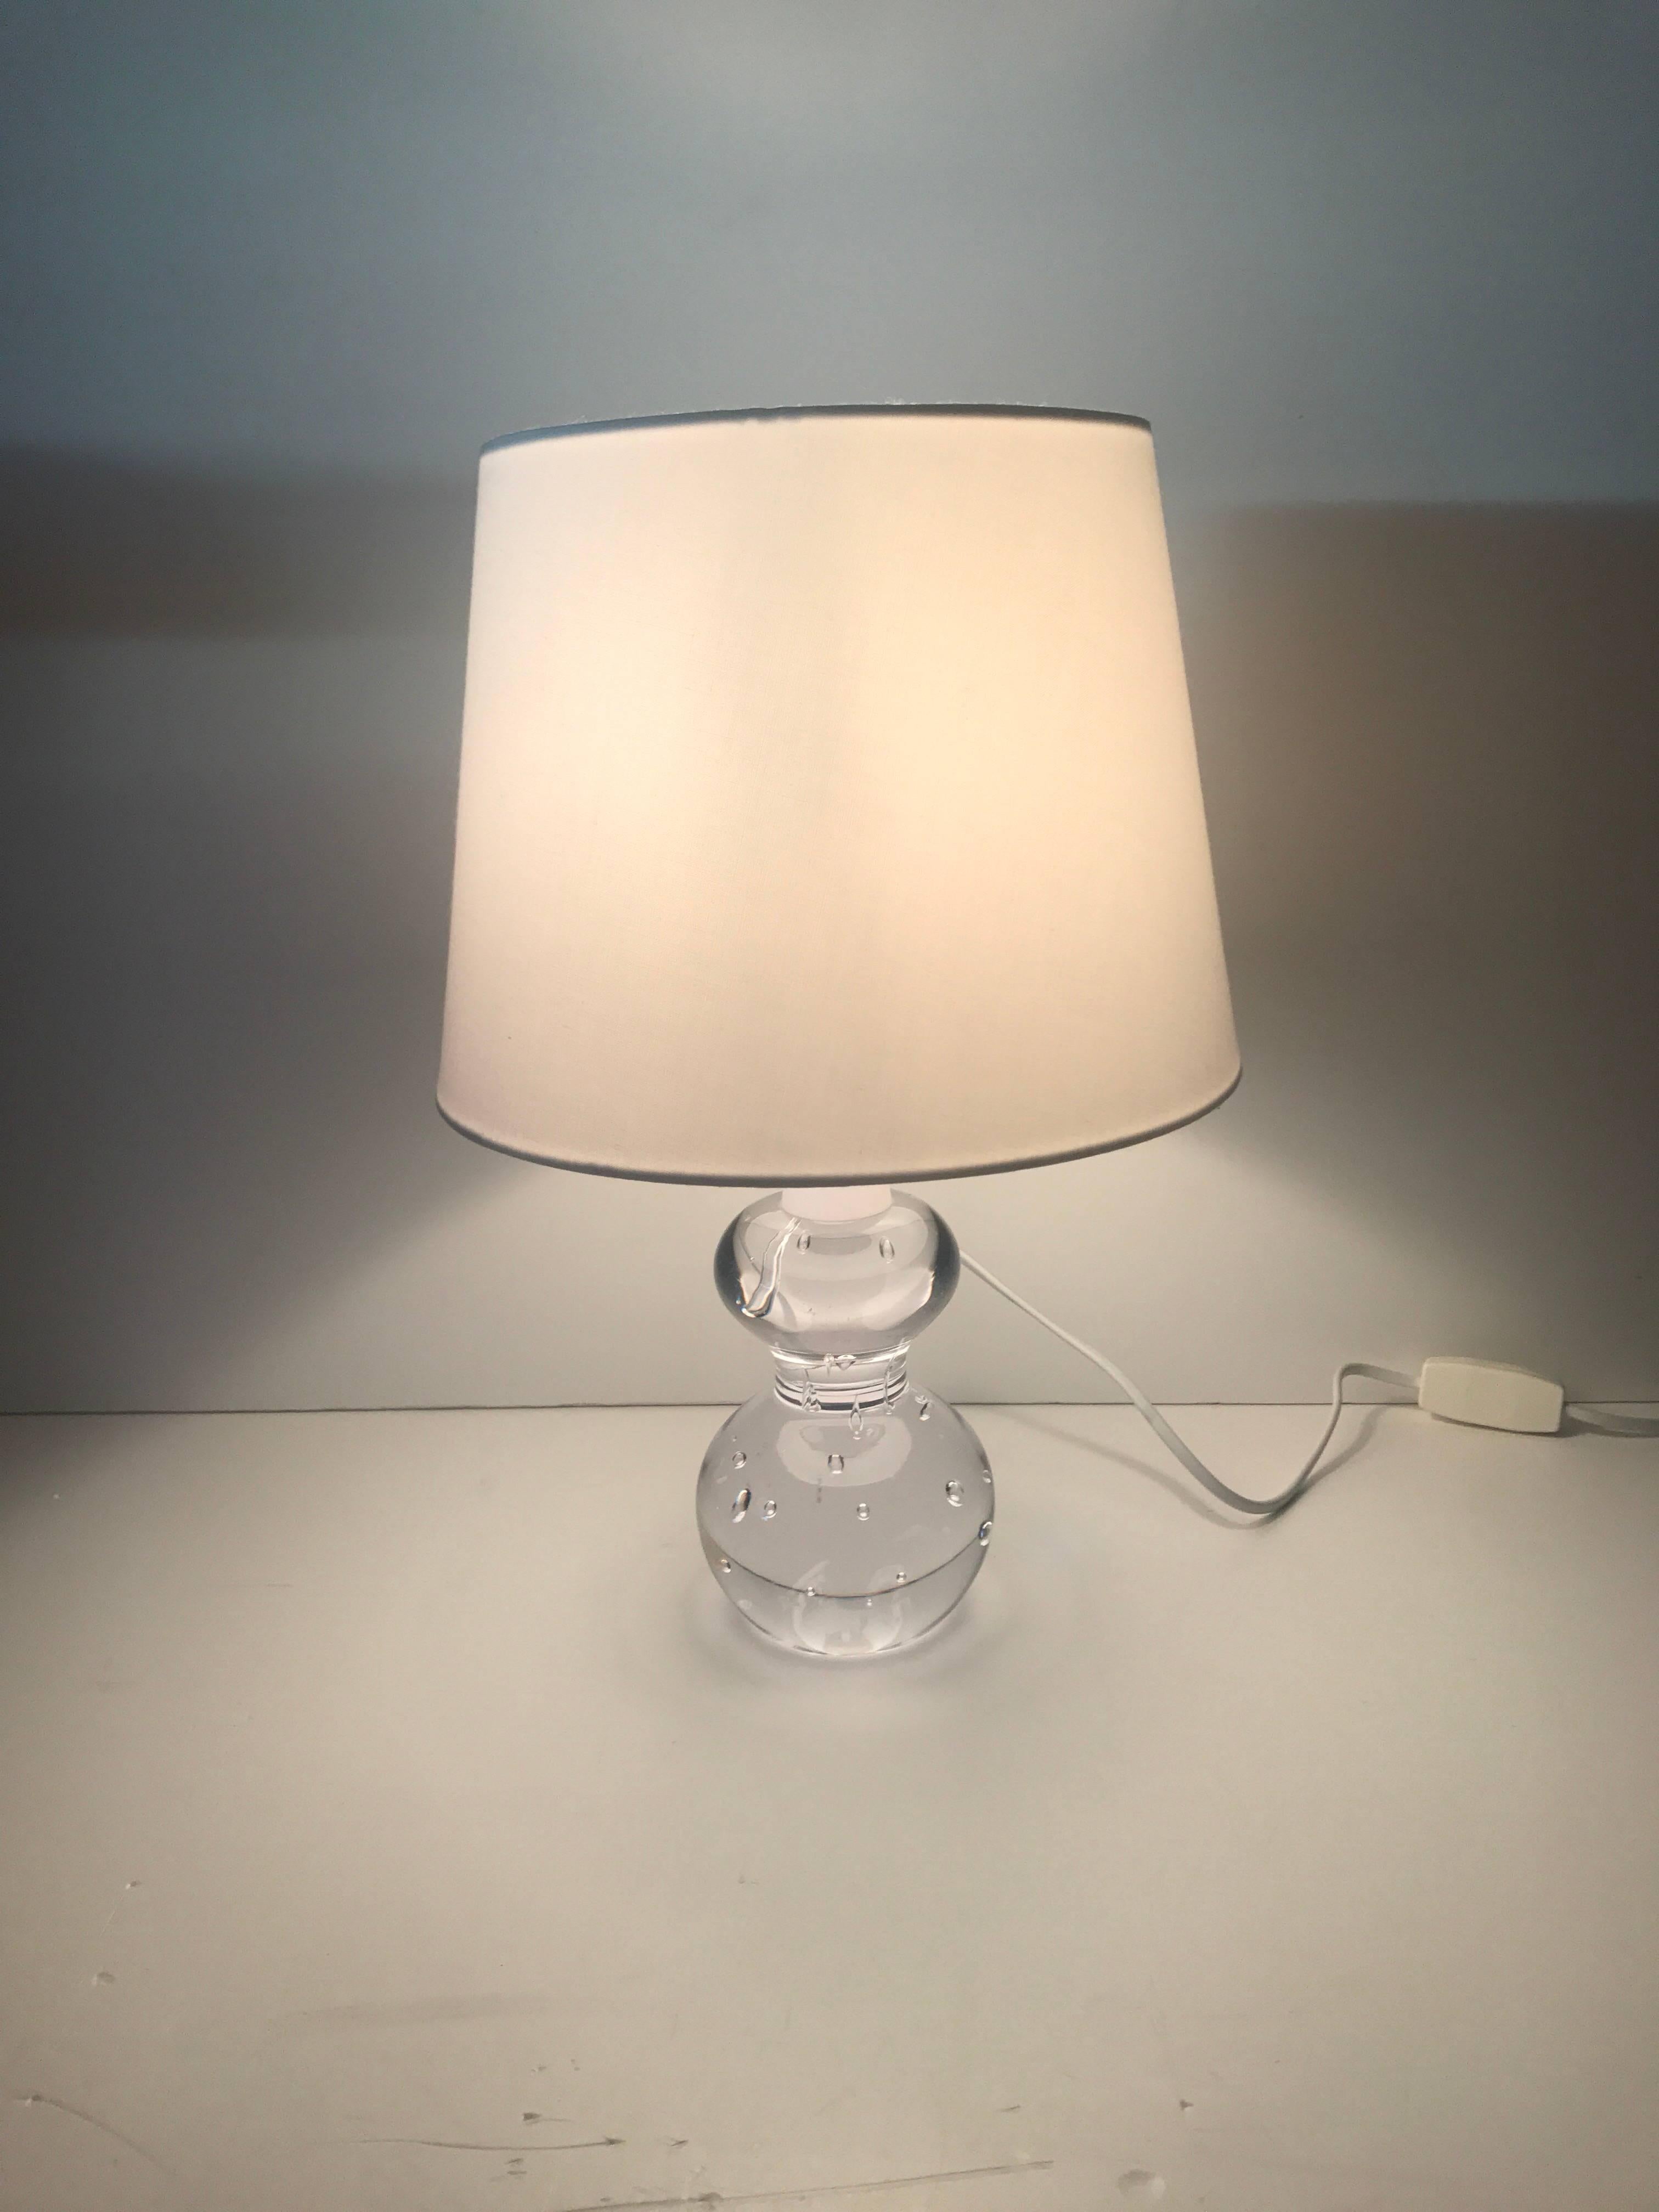 Josef Frank table lamp model 1819-3 for High End House Svensk Tenn in Stockholm. The base was most likely made at Orrefors or Eneryda glass factory in the mid-20th century. 

The lamp is in a fantastic original condition. All electric components